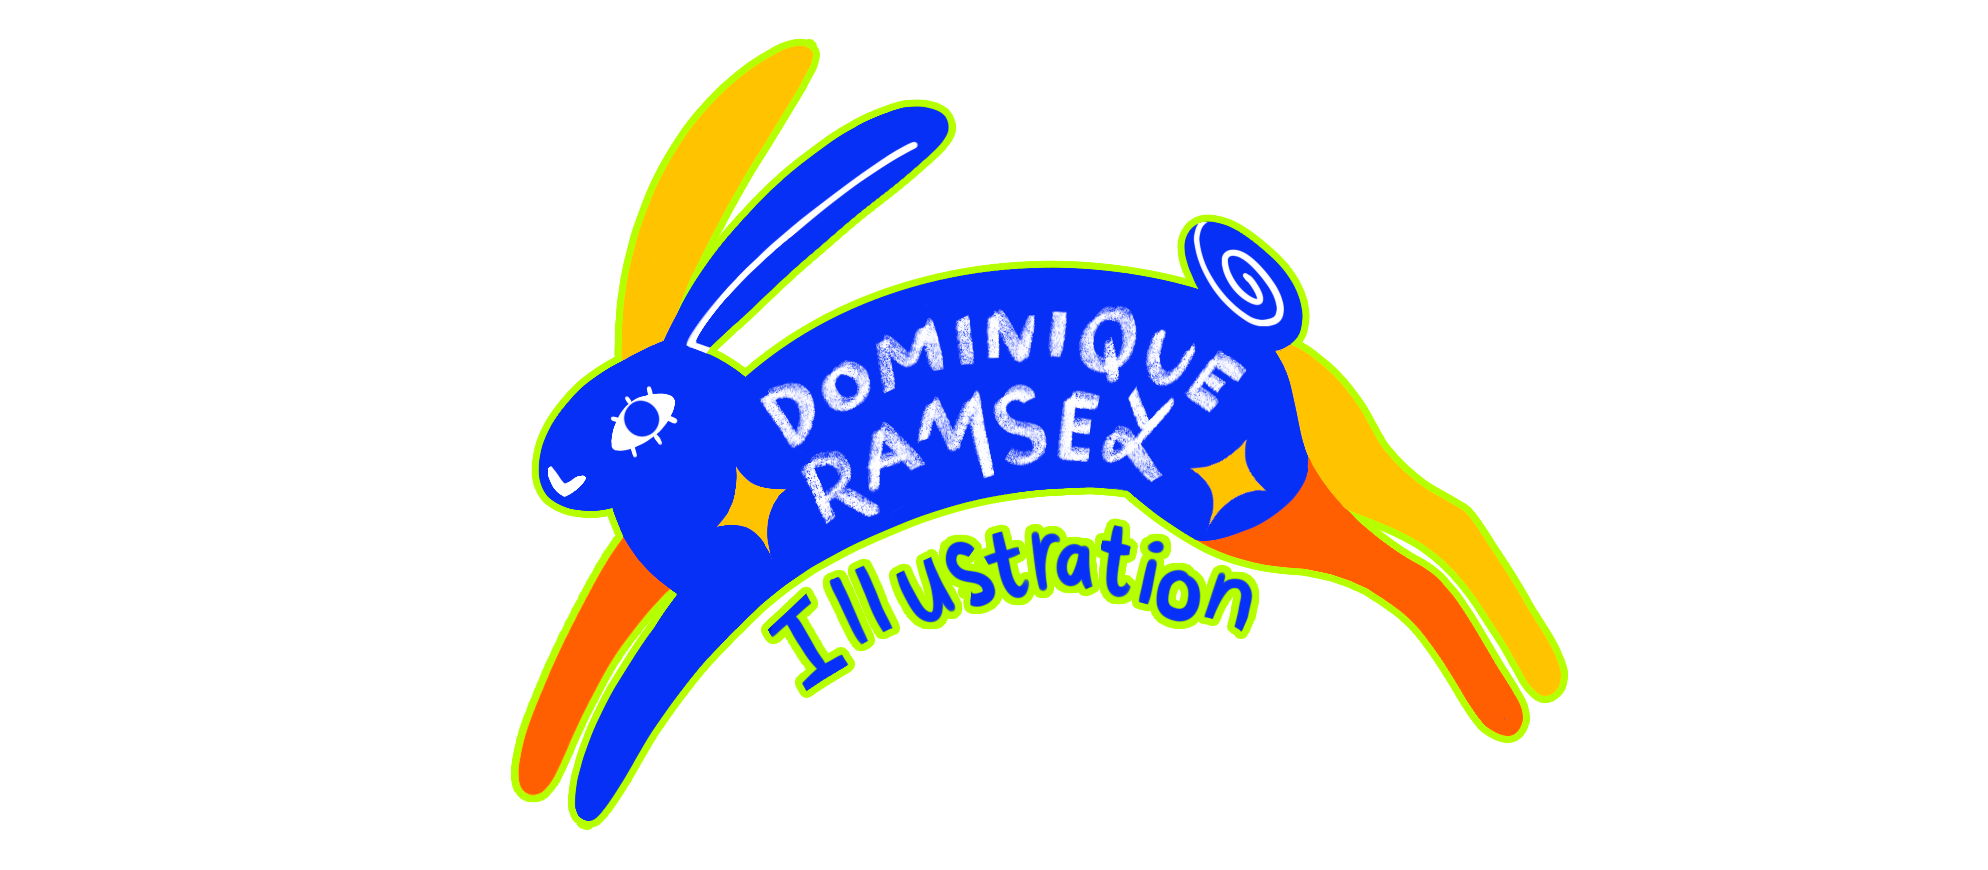 A blue, yellow, and orange rabbit leaping. the text on the rabbit reads "Dominique Ramsey". While text under the rabbit reads "illustration".